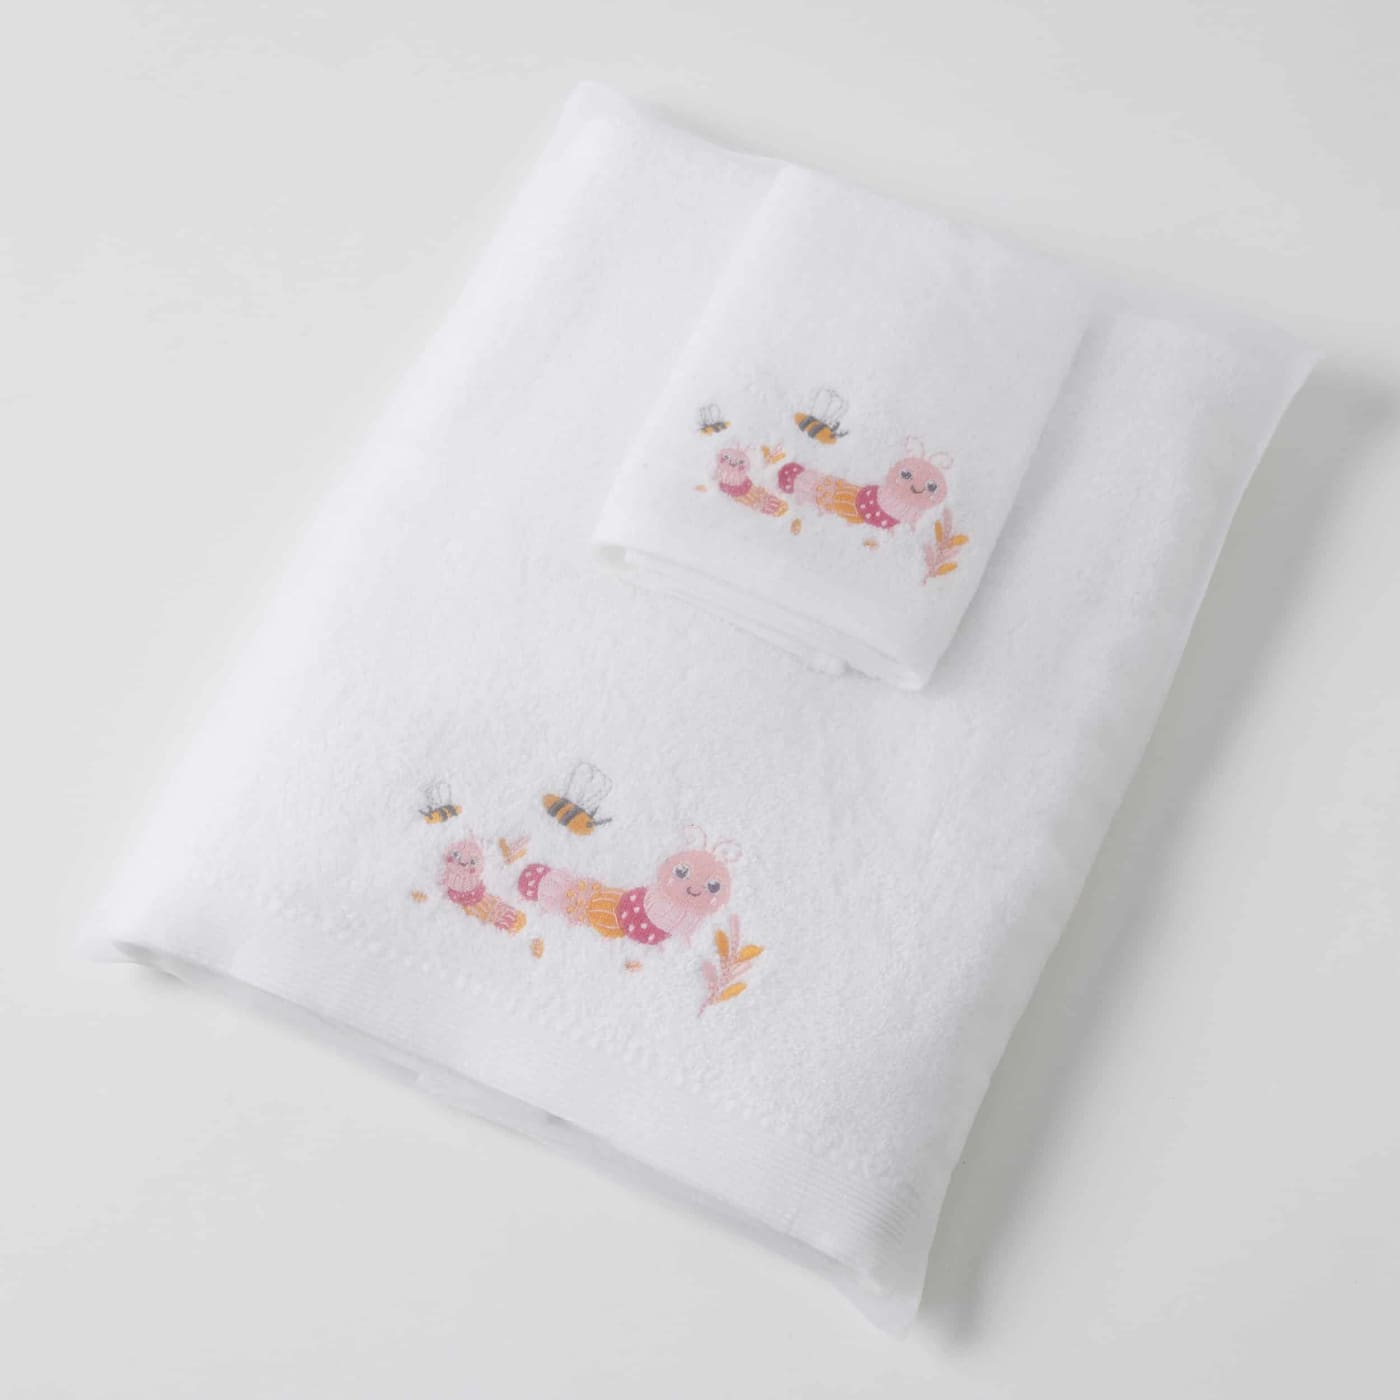 Jiggle & Giggle Towel & Face Washer Set in Organza Bag - Little Critters Pink - Little Critters Pink - BATHTIME & CHANGING - TOWELS/WASHERS